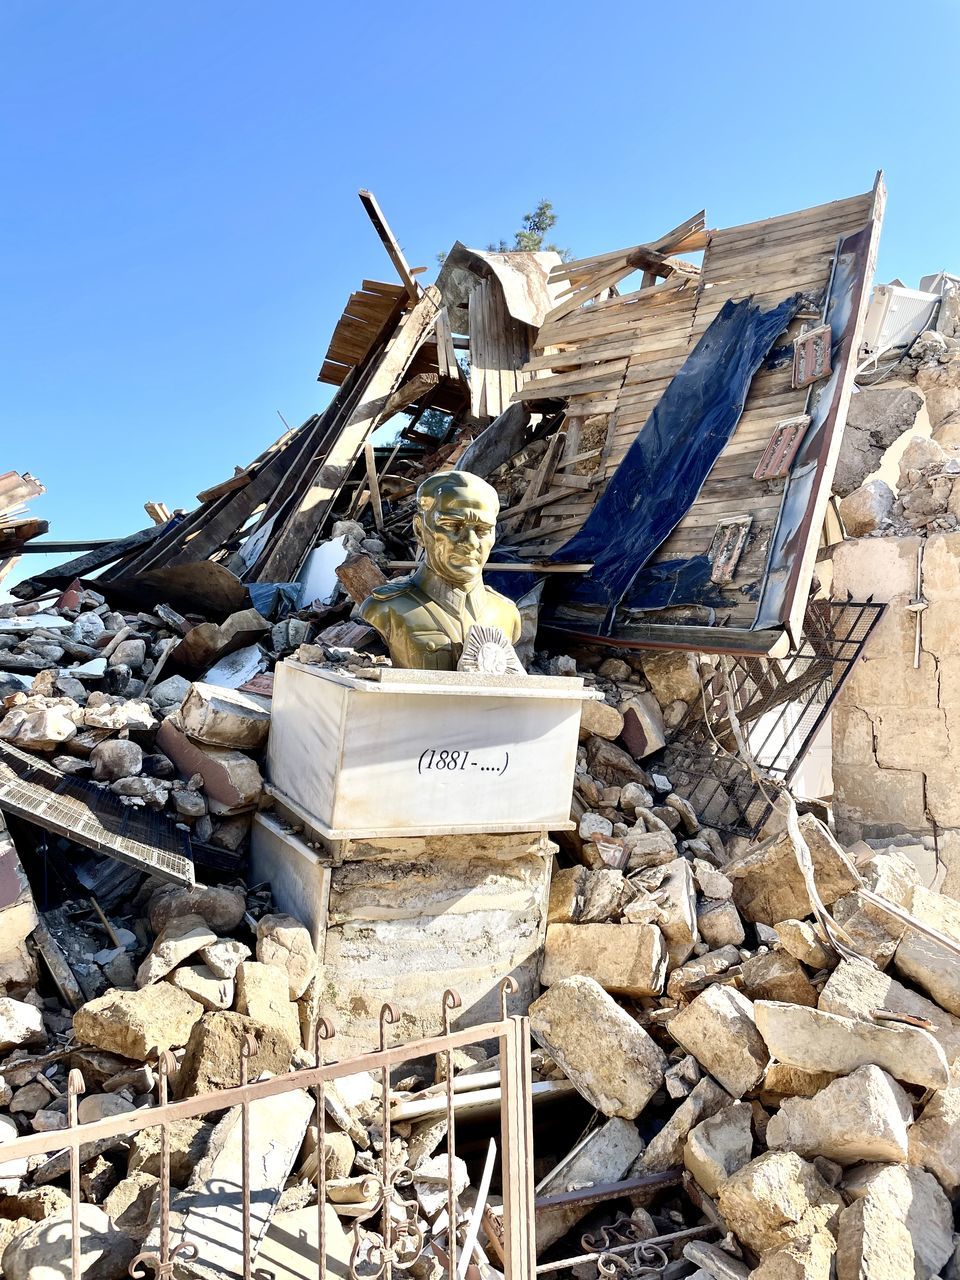 earthquake, nature, sky, day, demolition, rubble, no people, architecture, clear sky, scrap, damaged, blue, outdoors, ruined, sunlight, abandoned, large group of objects, sunny, heap